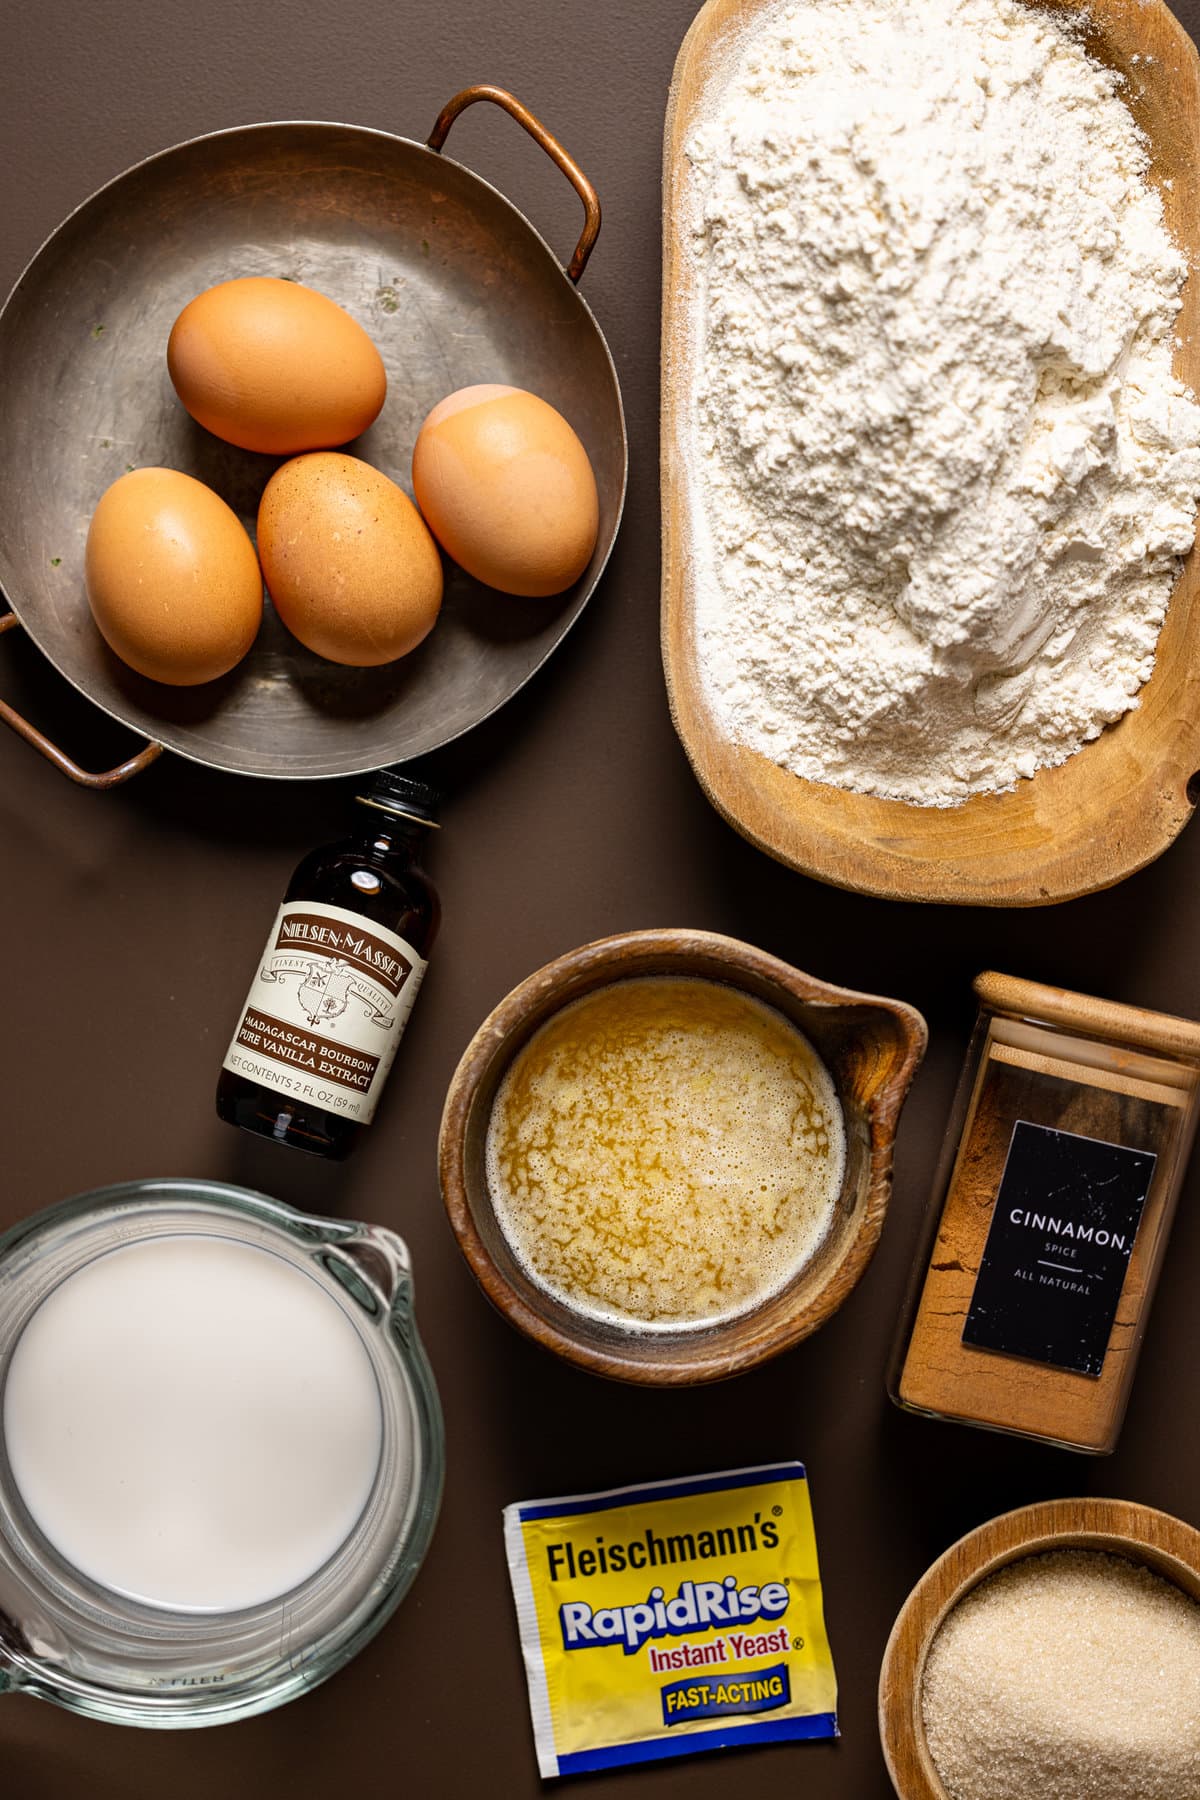 Ingredients for Homemade Classic Glazed Doughnuts including eggs, cinnamon, and instant yeast